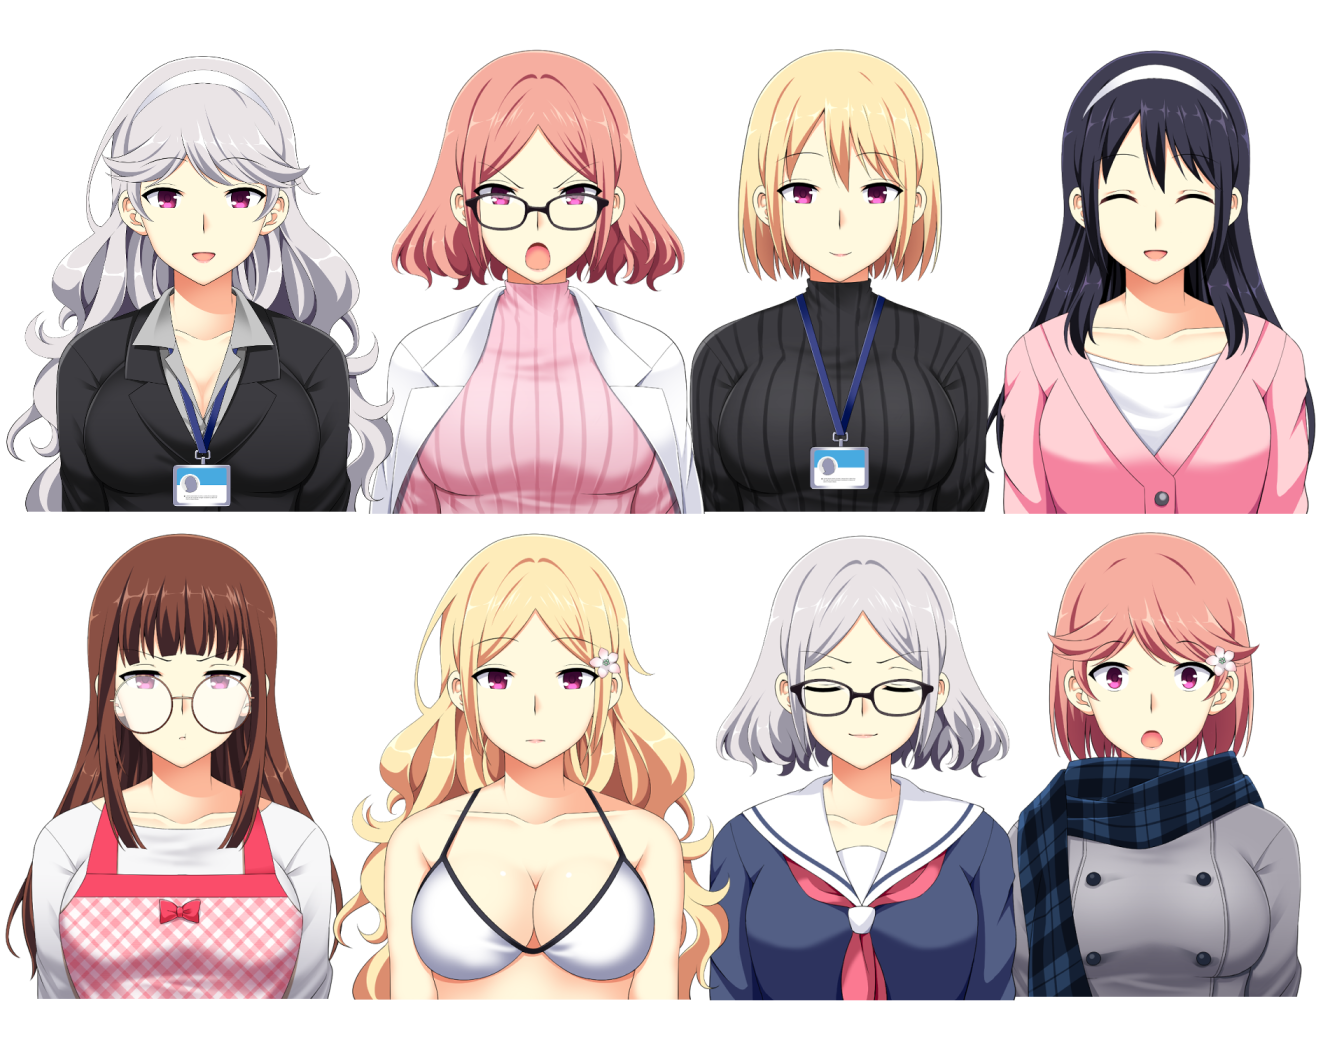 Female Mature Character Sprite for VN by sutemo